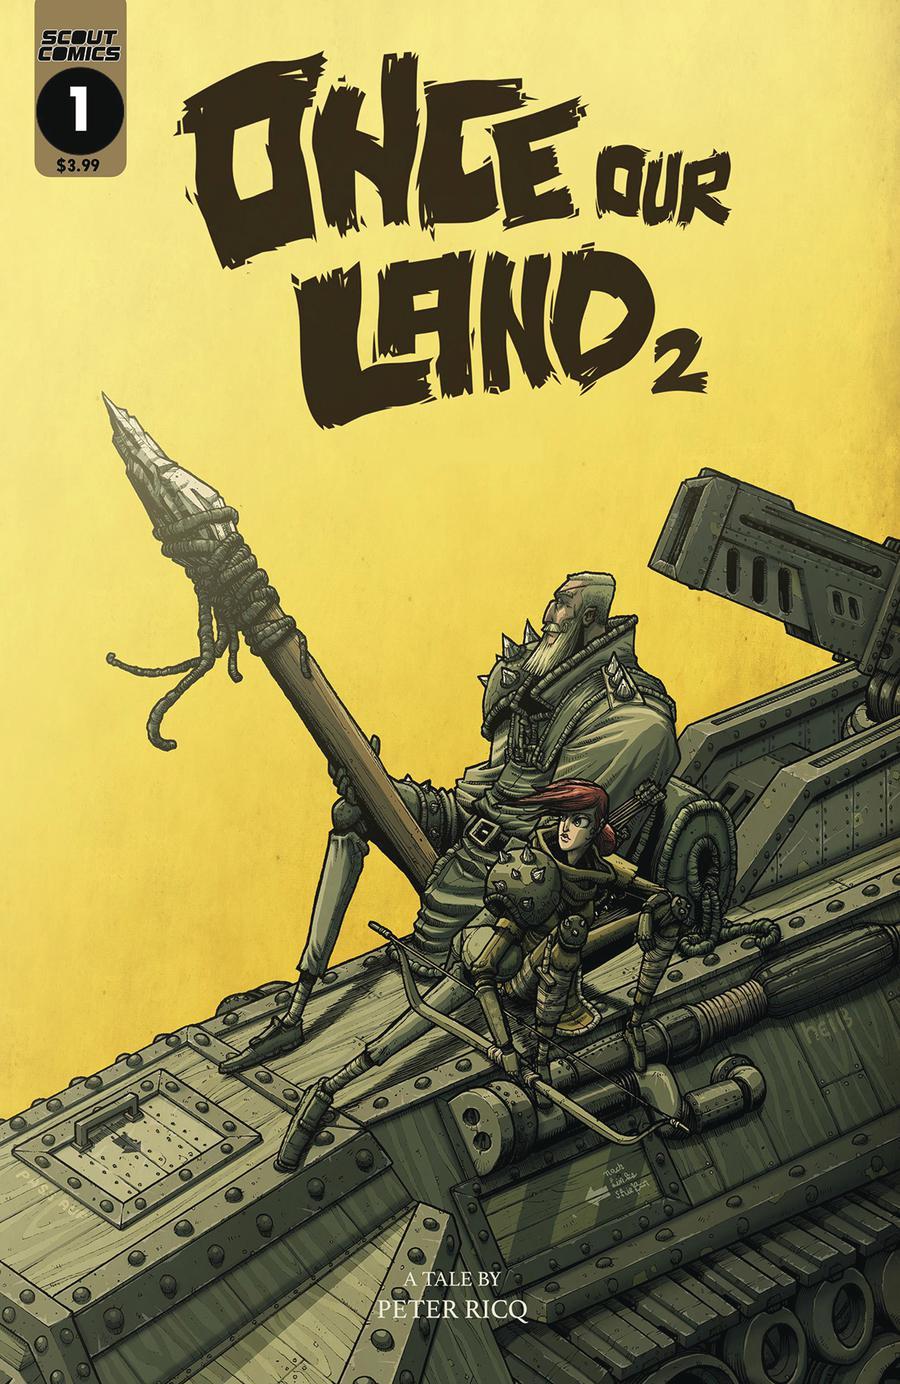 Once Our Land Book 2 Vol. 1 #1